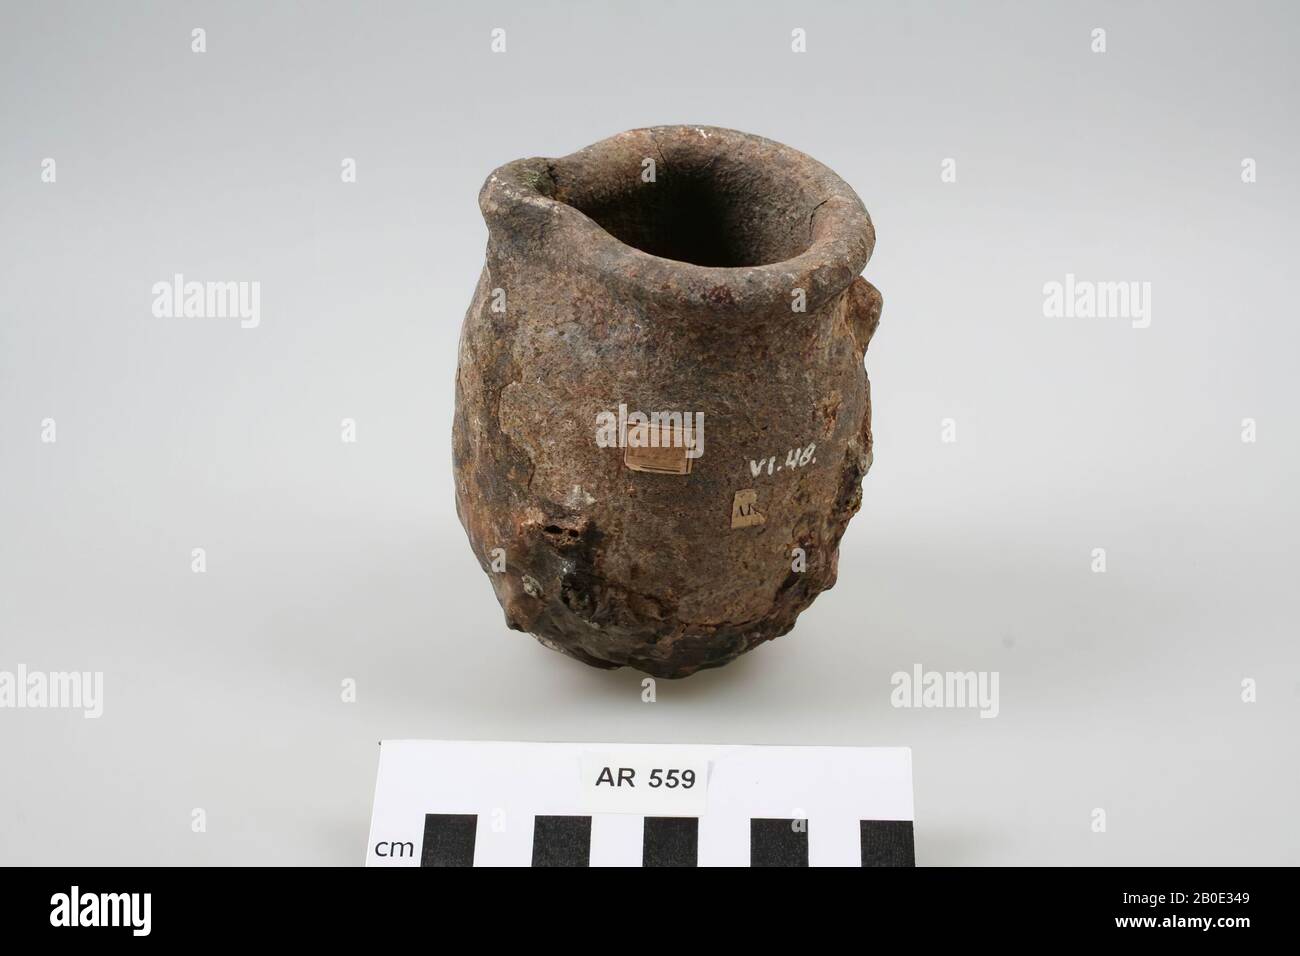 Jar of earthenware, used for metal casting, with baked glaze. 2 vertical cracks from the edge, remnants of metal at the bottom of the pot., Melting pot, earthenware, h: 11.9 cm, diam: 9 cm, roman, Netherlands, South Holland, Leidschendam-Voorburg, Voorburg, Arentsburg Stock Photo